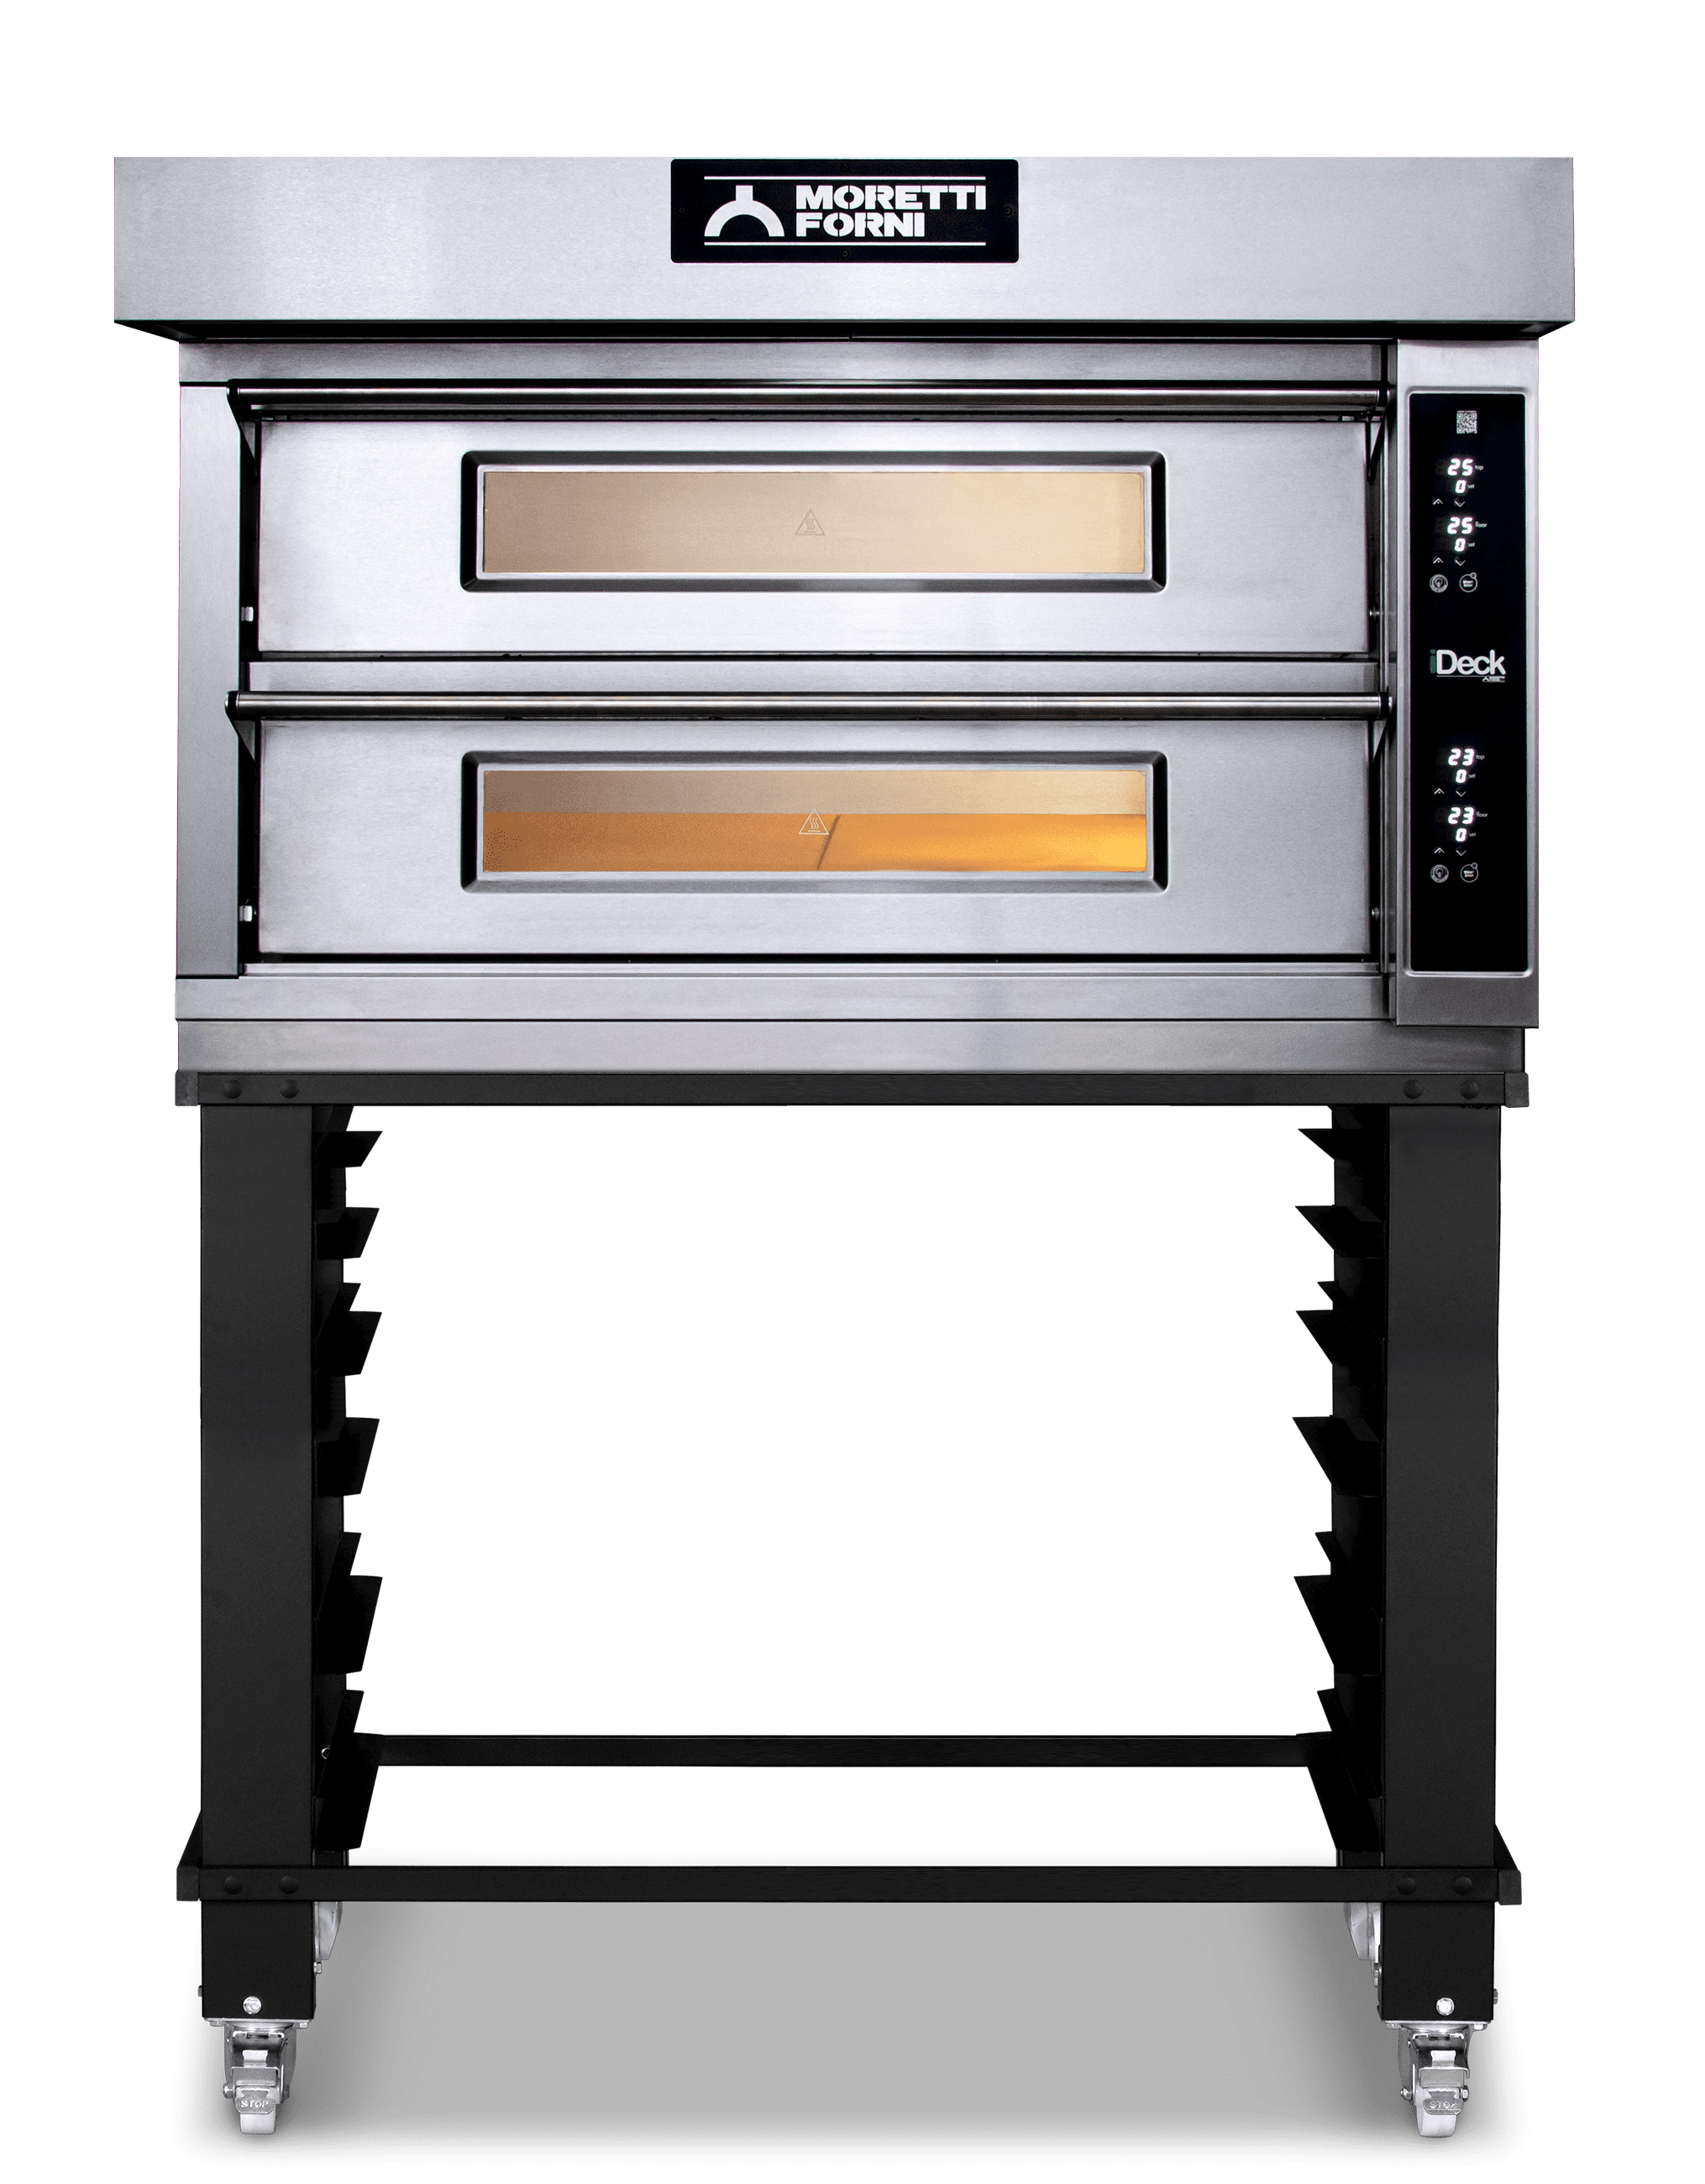 ID-D 105.105 iDeck electronic Control Electric Pizza Oven 41"W x 41"D chamber. 2 Deck